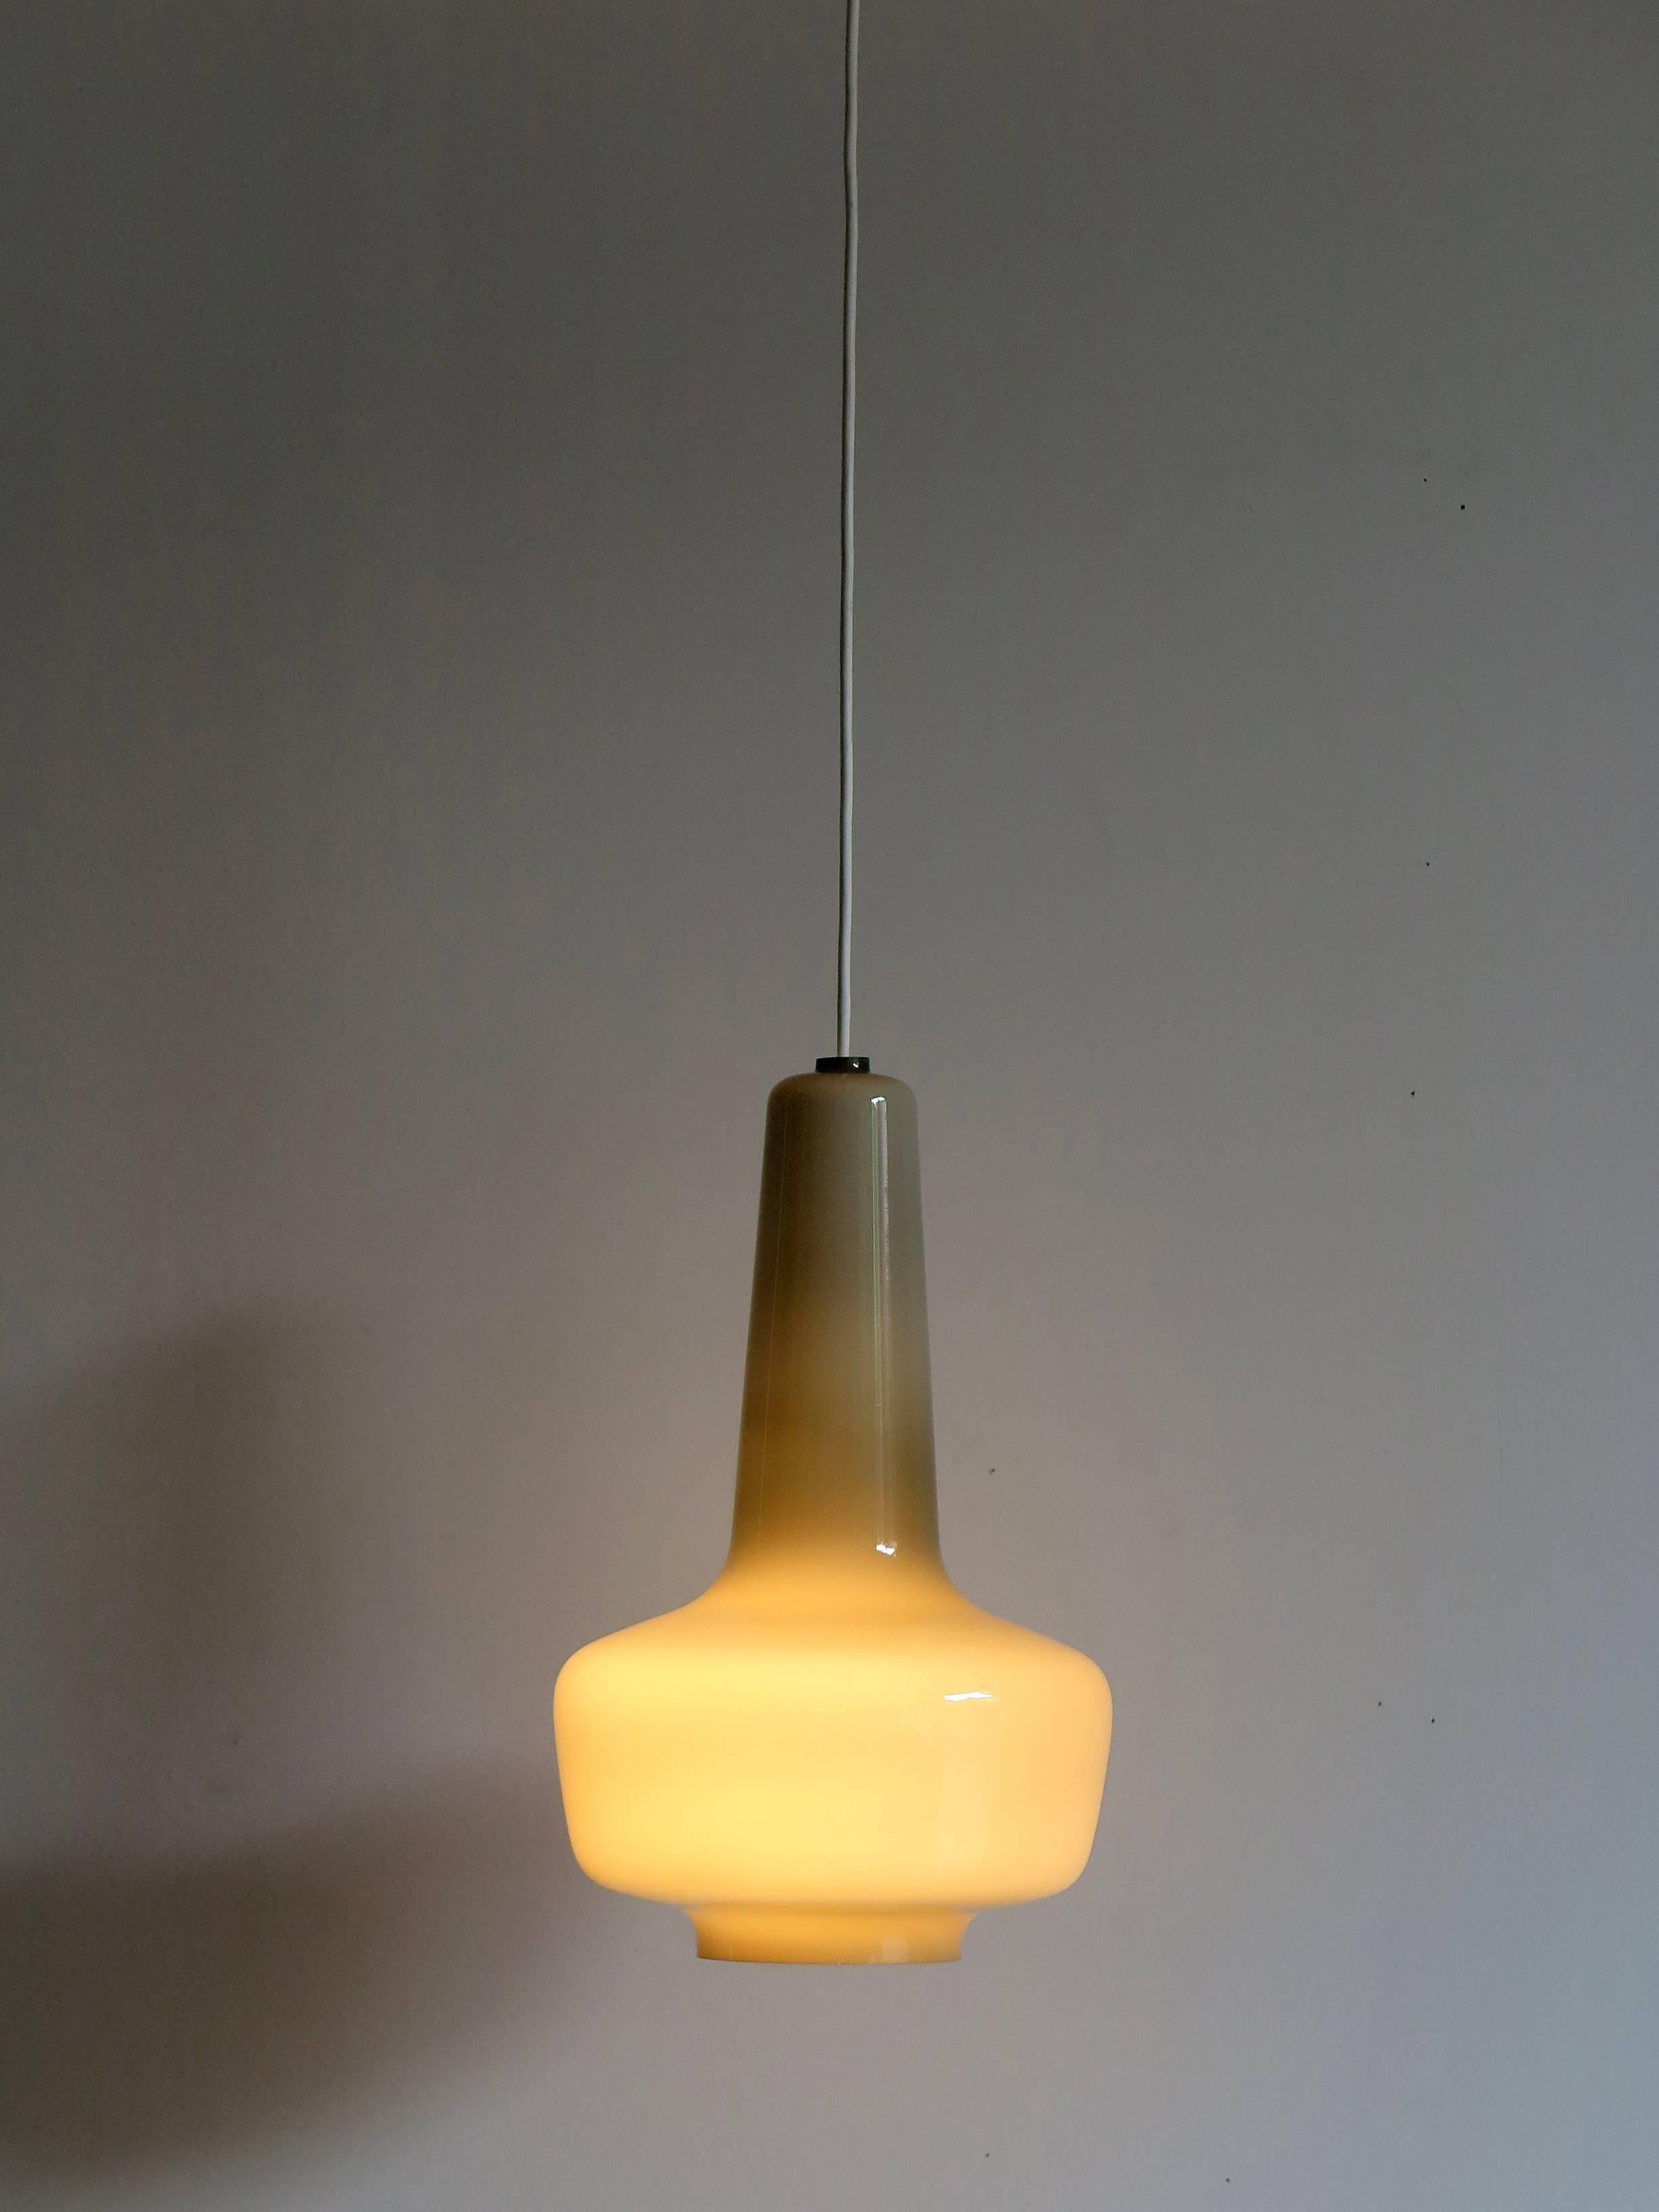 Kreta midcentury Scandinavian and Danish pendant lamp designed by Jacob Eiler Bang and manufactured by Fog and Mørup in 1965, it is made from grey opal glass in a funnel shape.